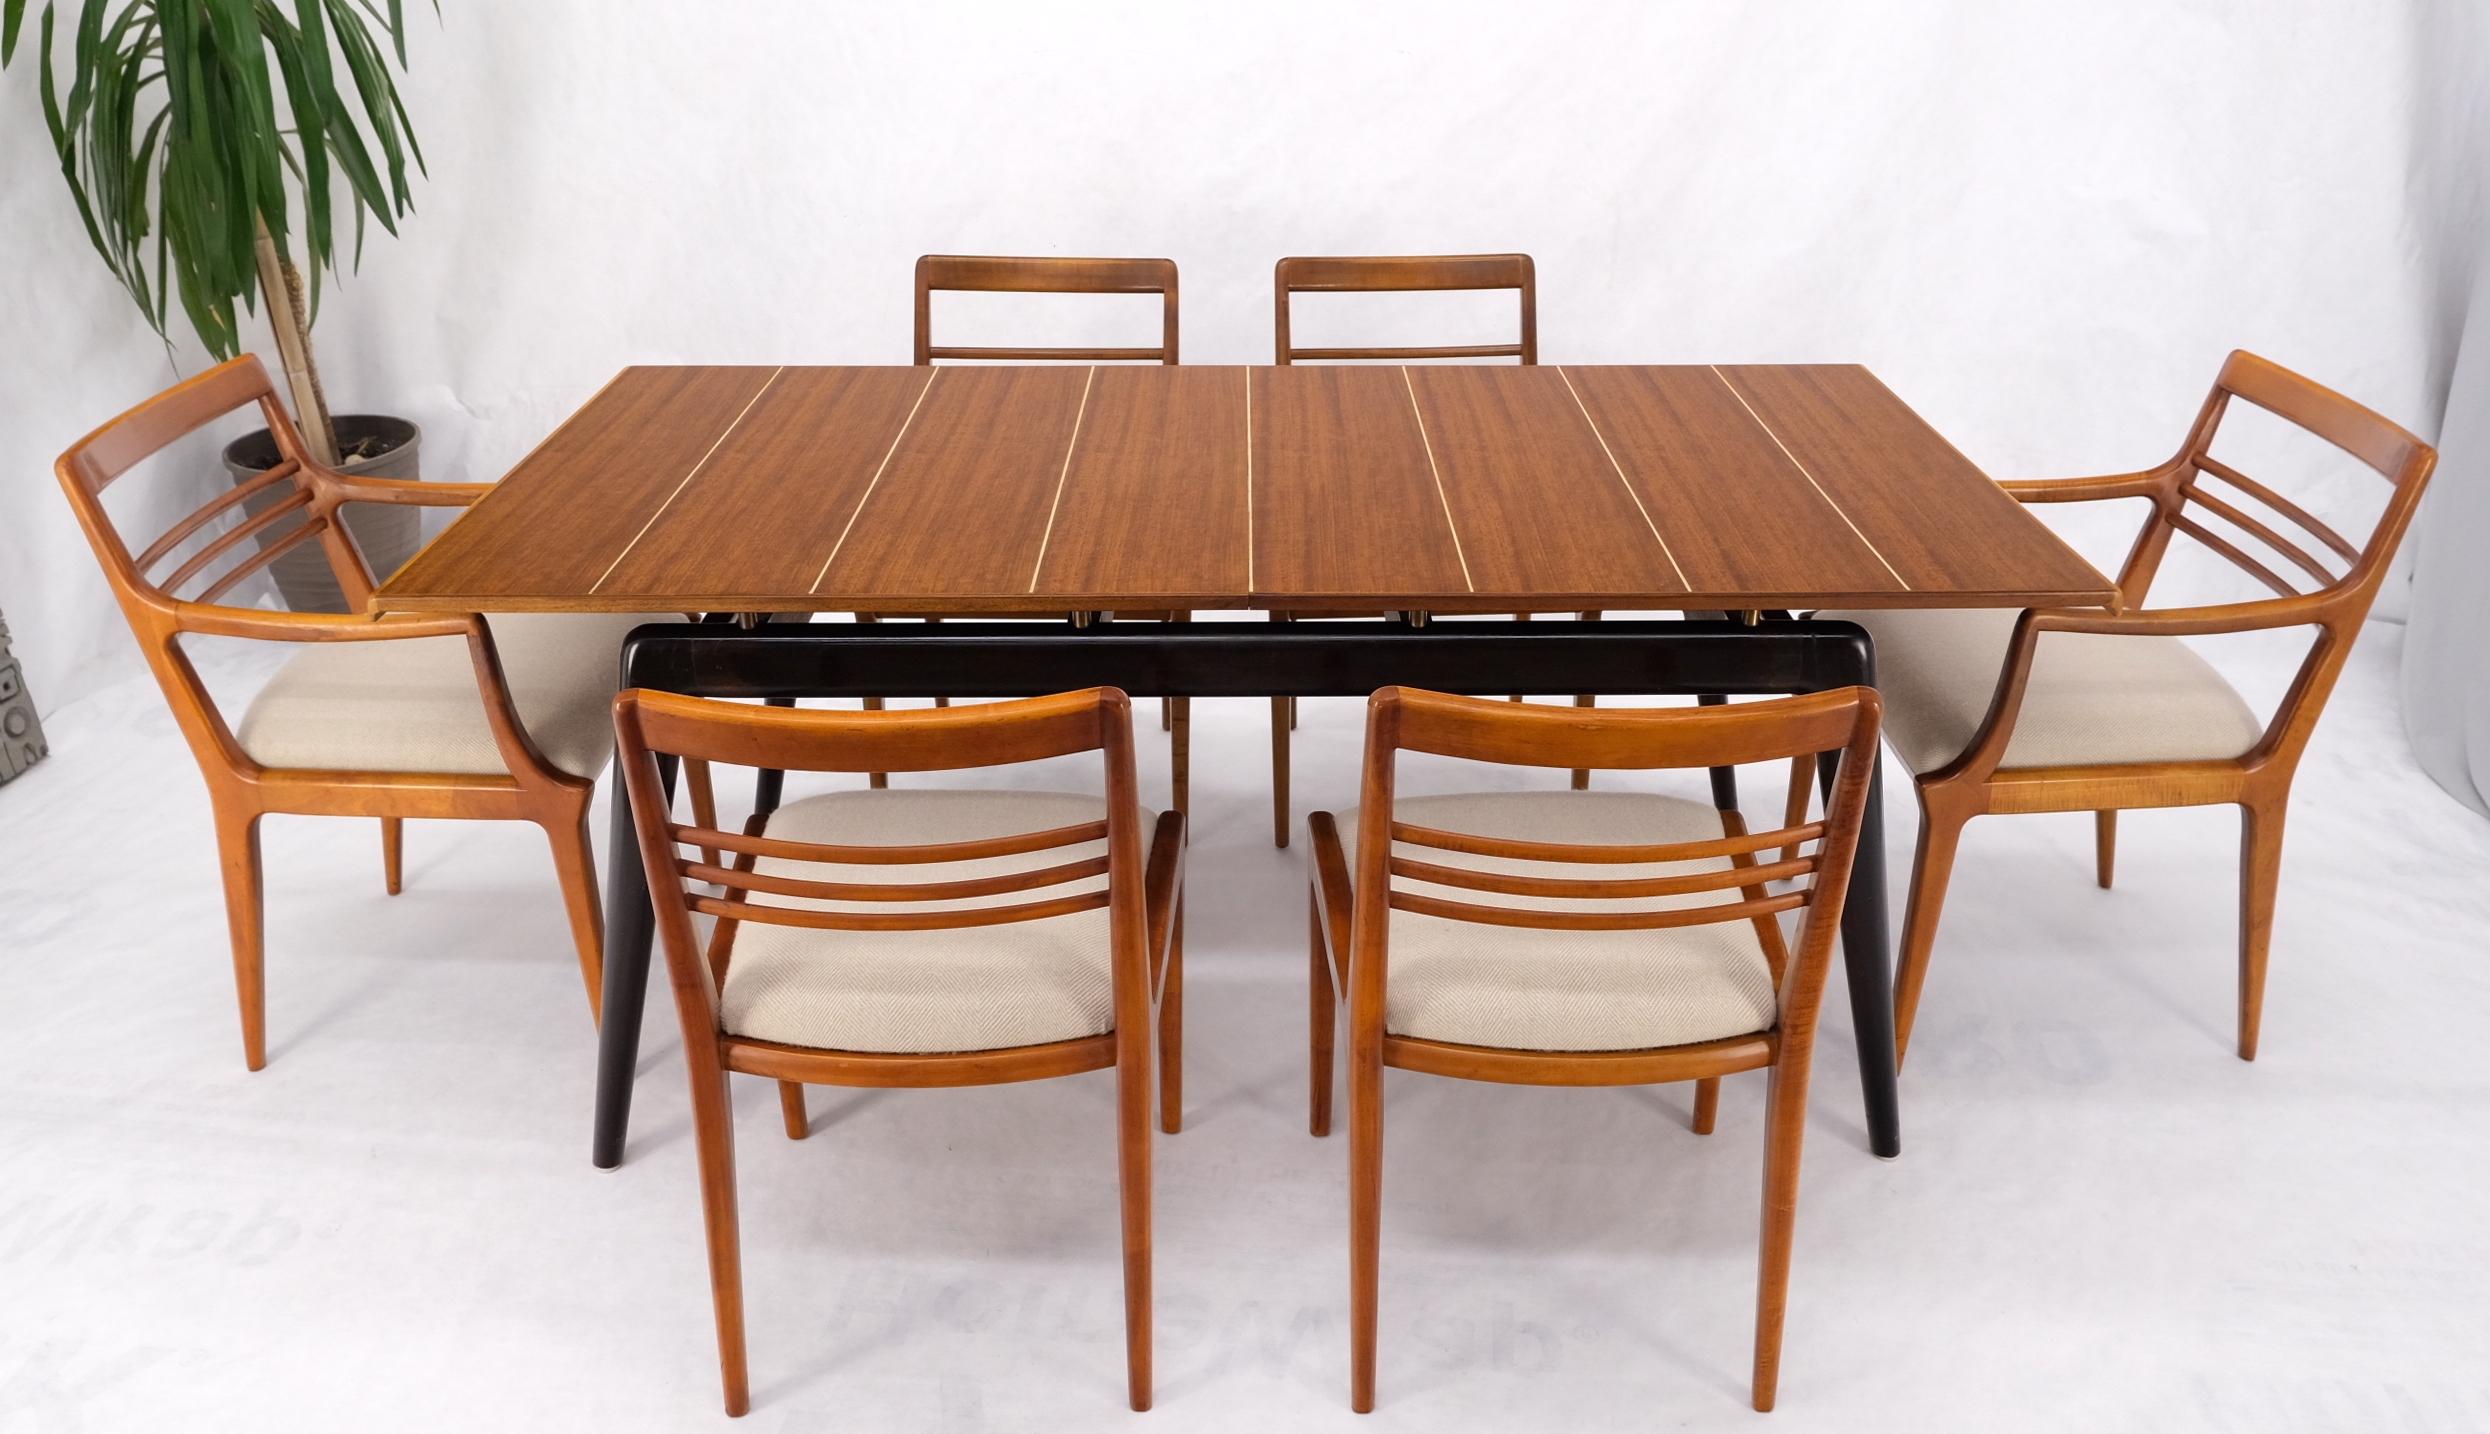 Italian Mid-Century Modern Dining Table 8 Chairs Set New Linen Upholstery Seats For Sale 7